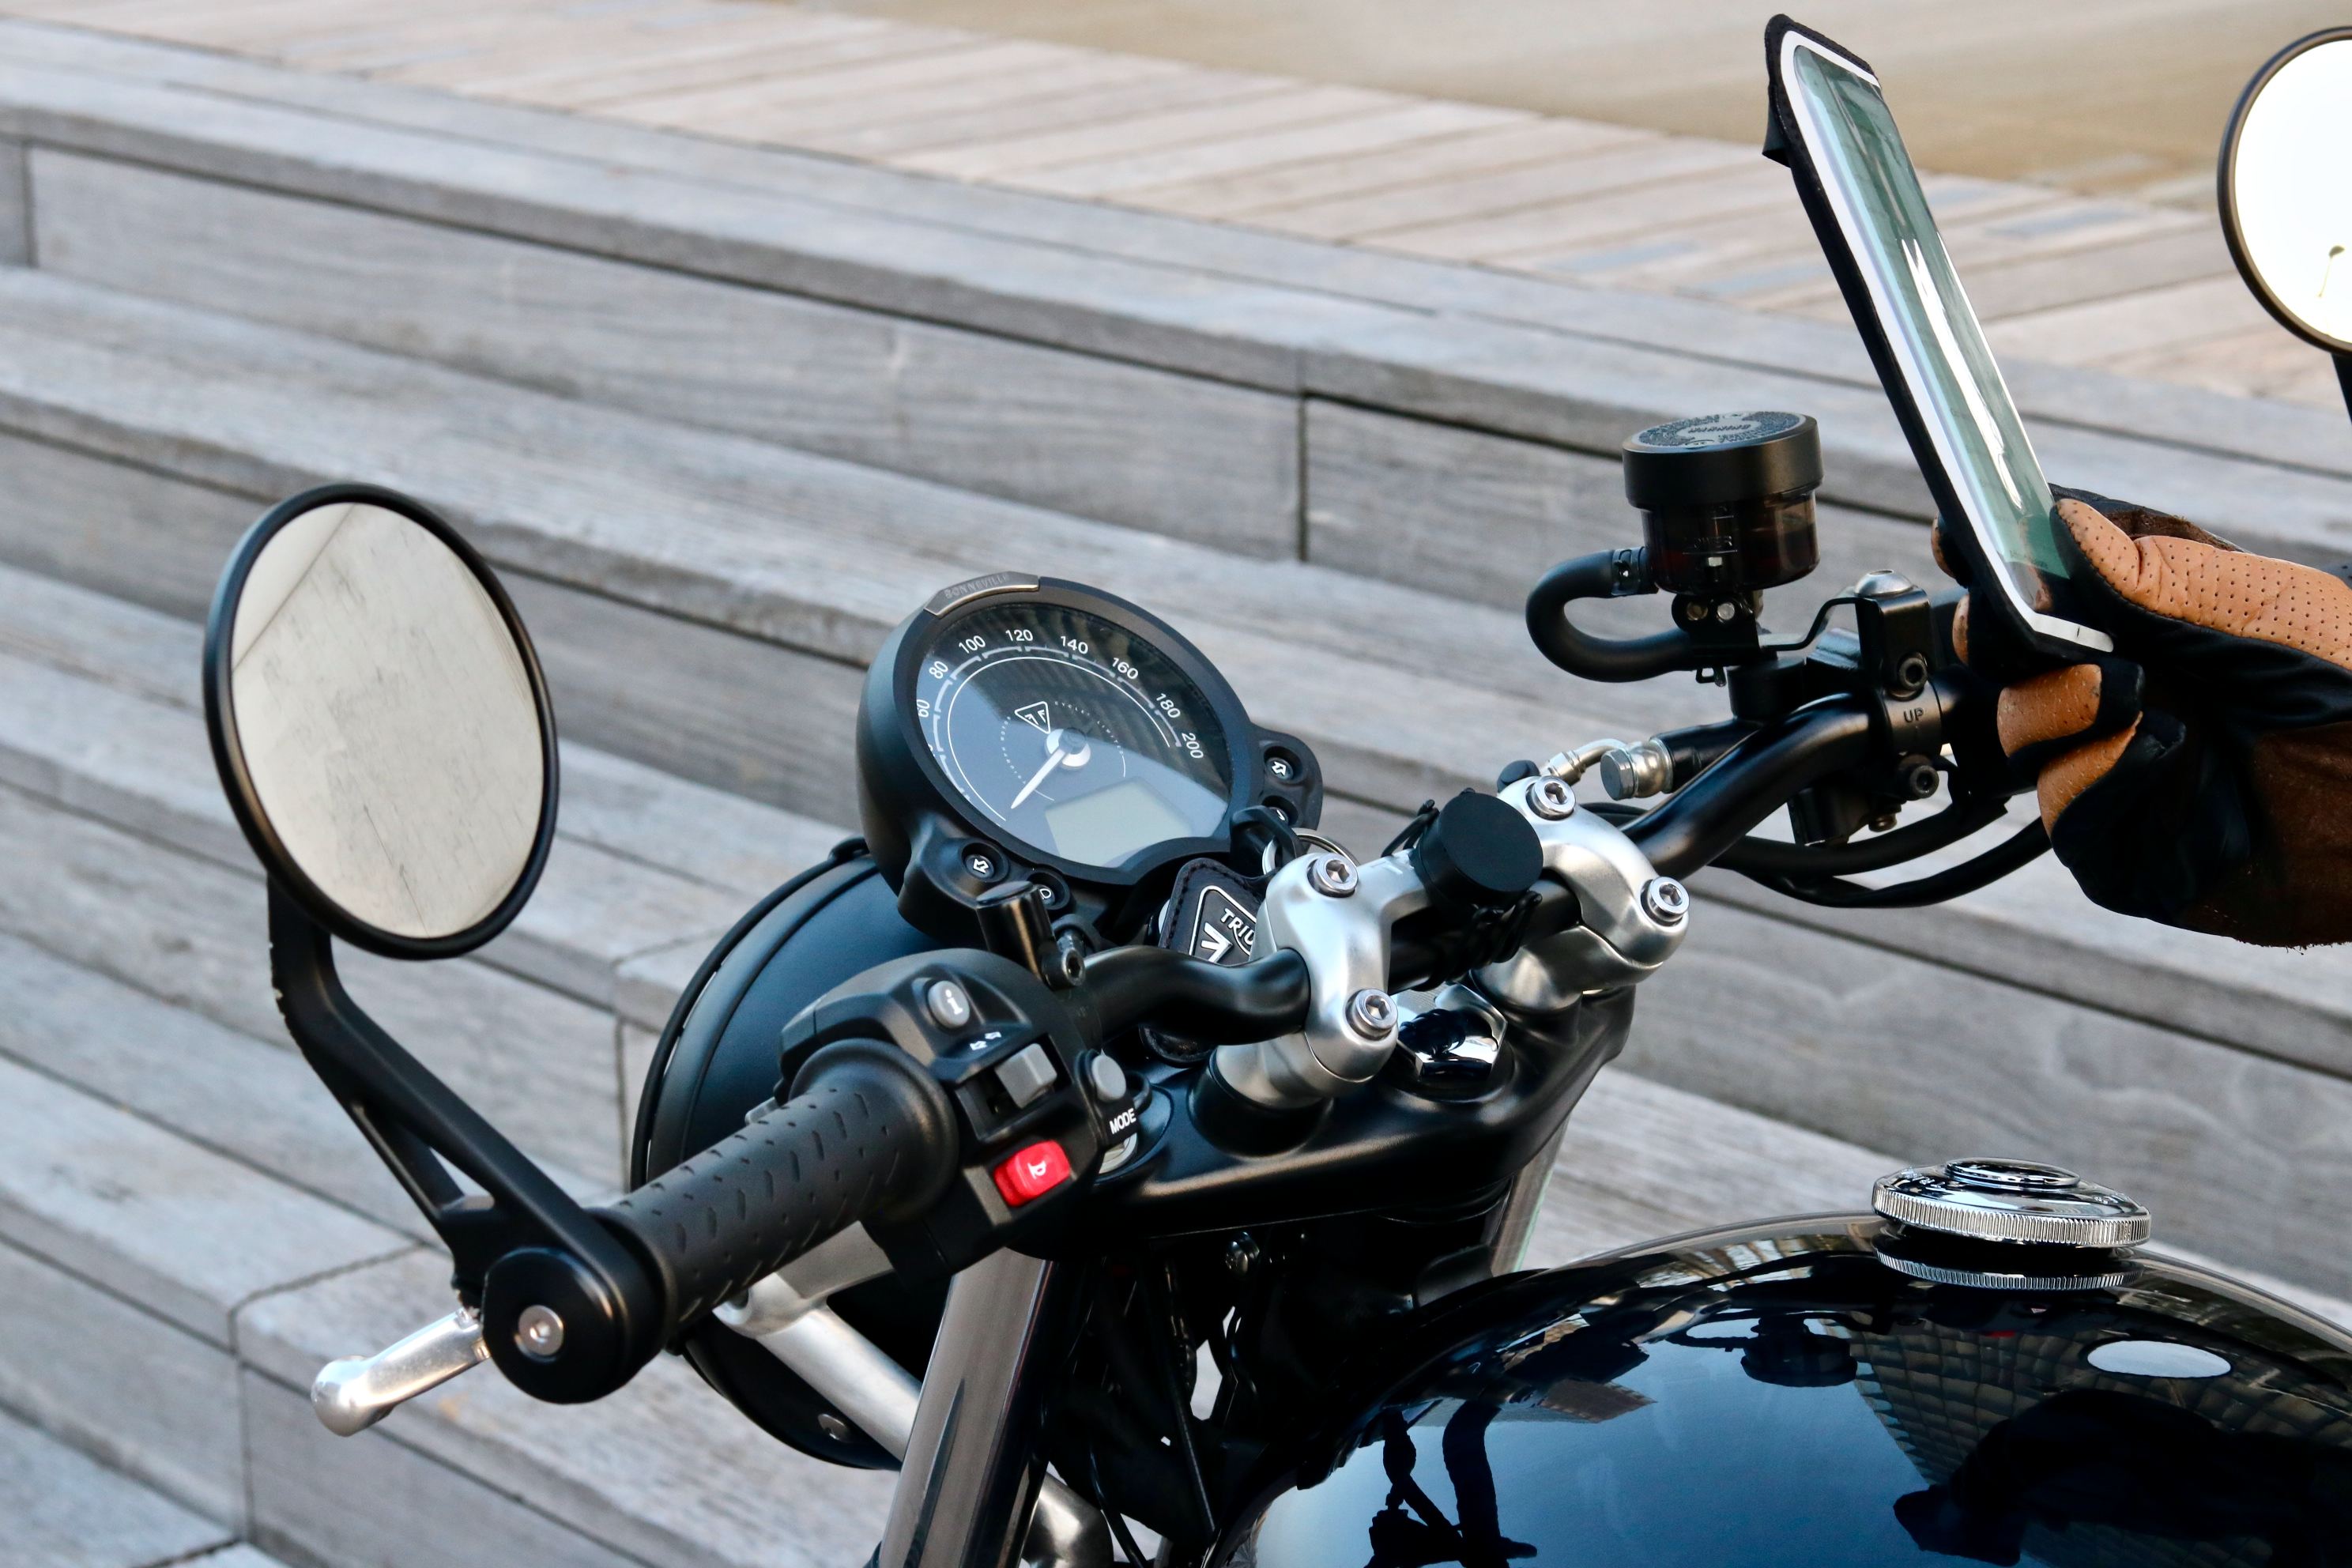 Magnetic holder for smartphone and iphone for motorbike - Shapeheart